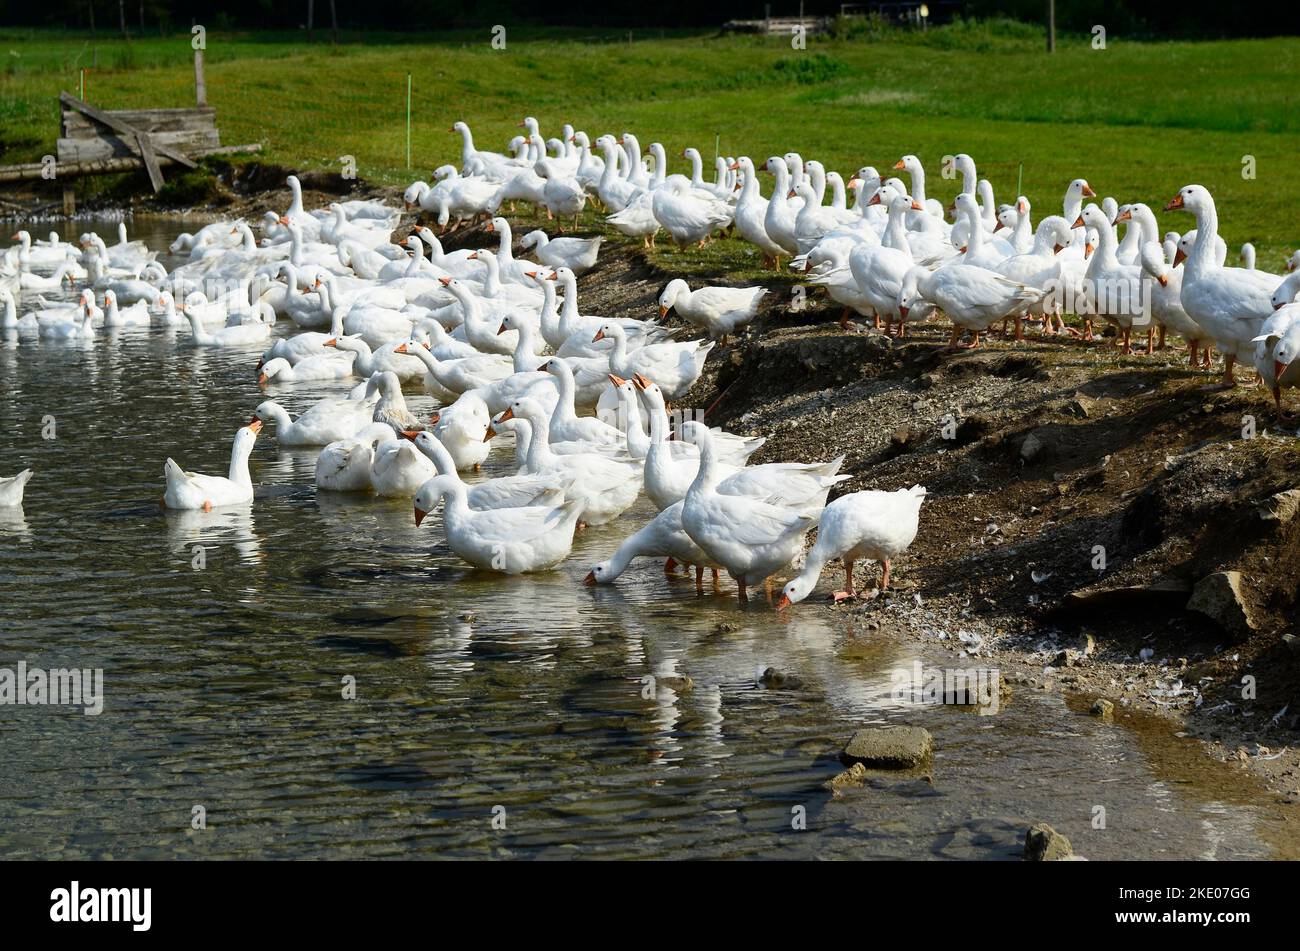 Austria, large group of white geese on pasture Stock Photo